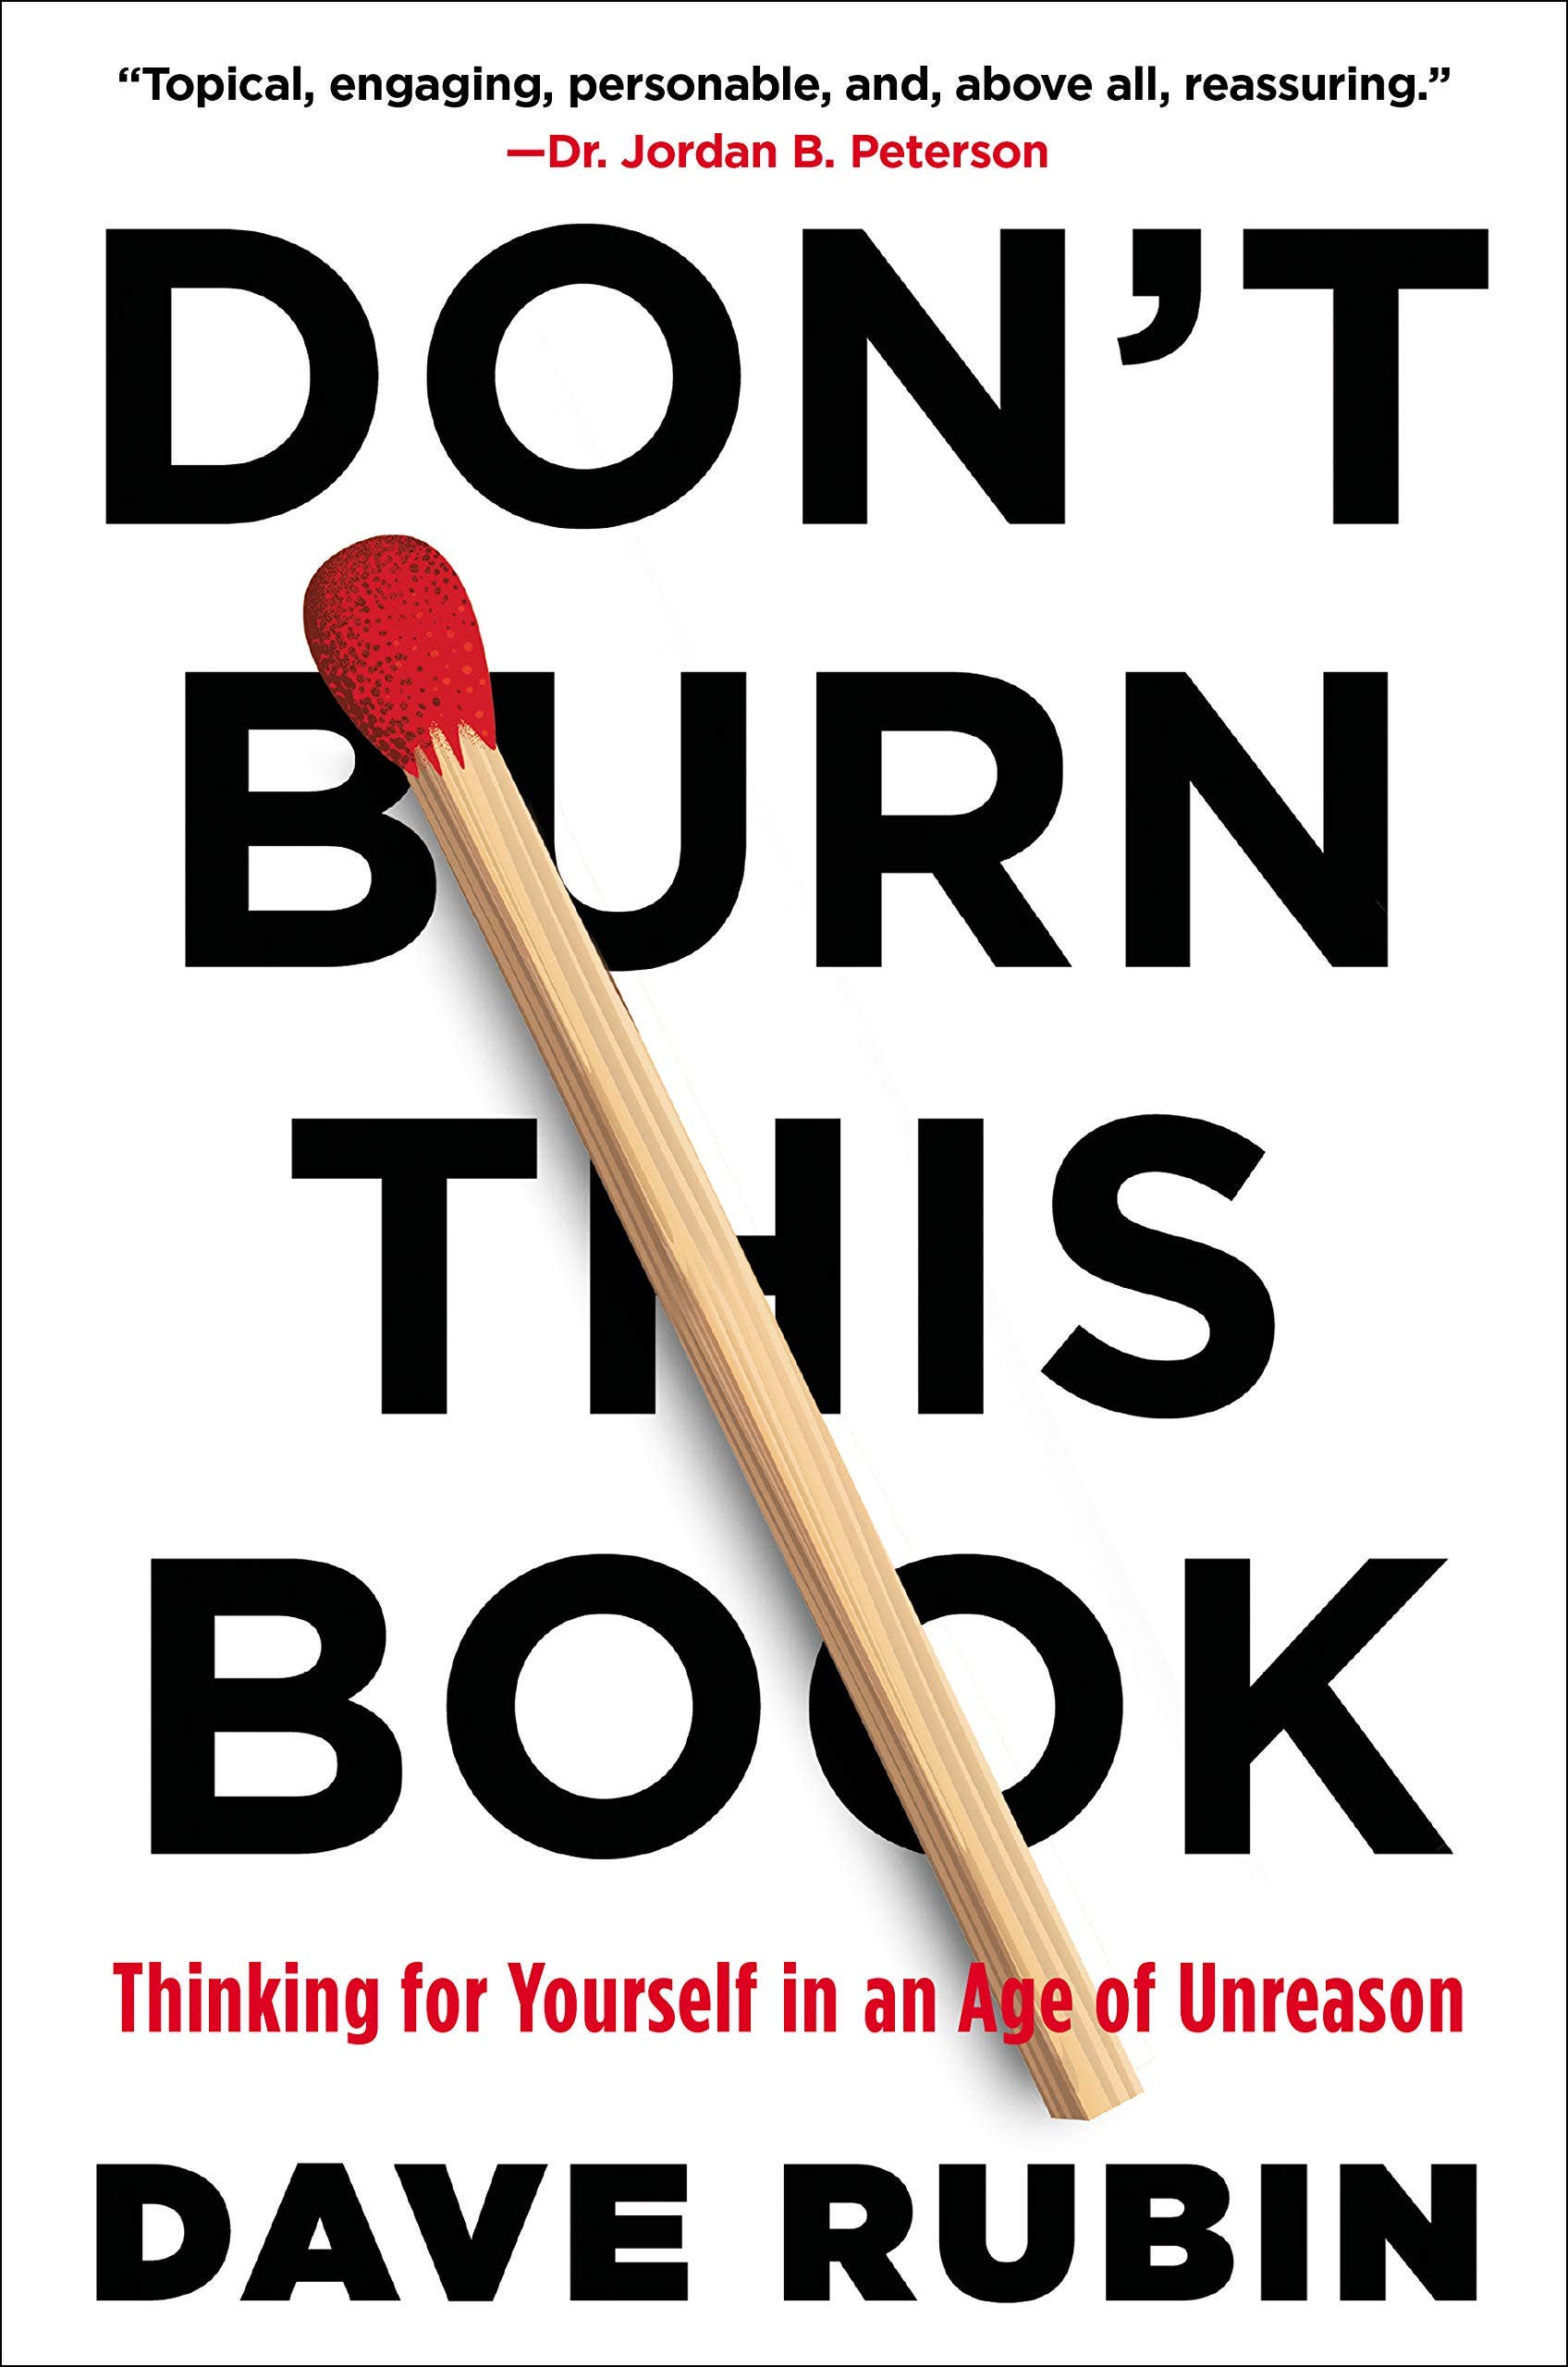 'Don't Burn This Book' by Dave Rubin